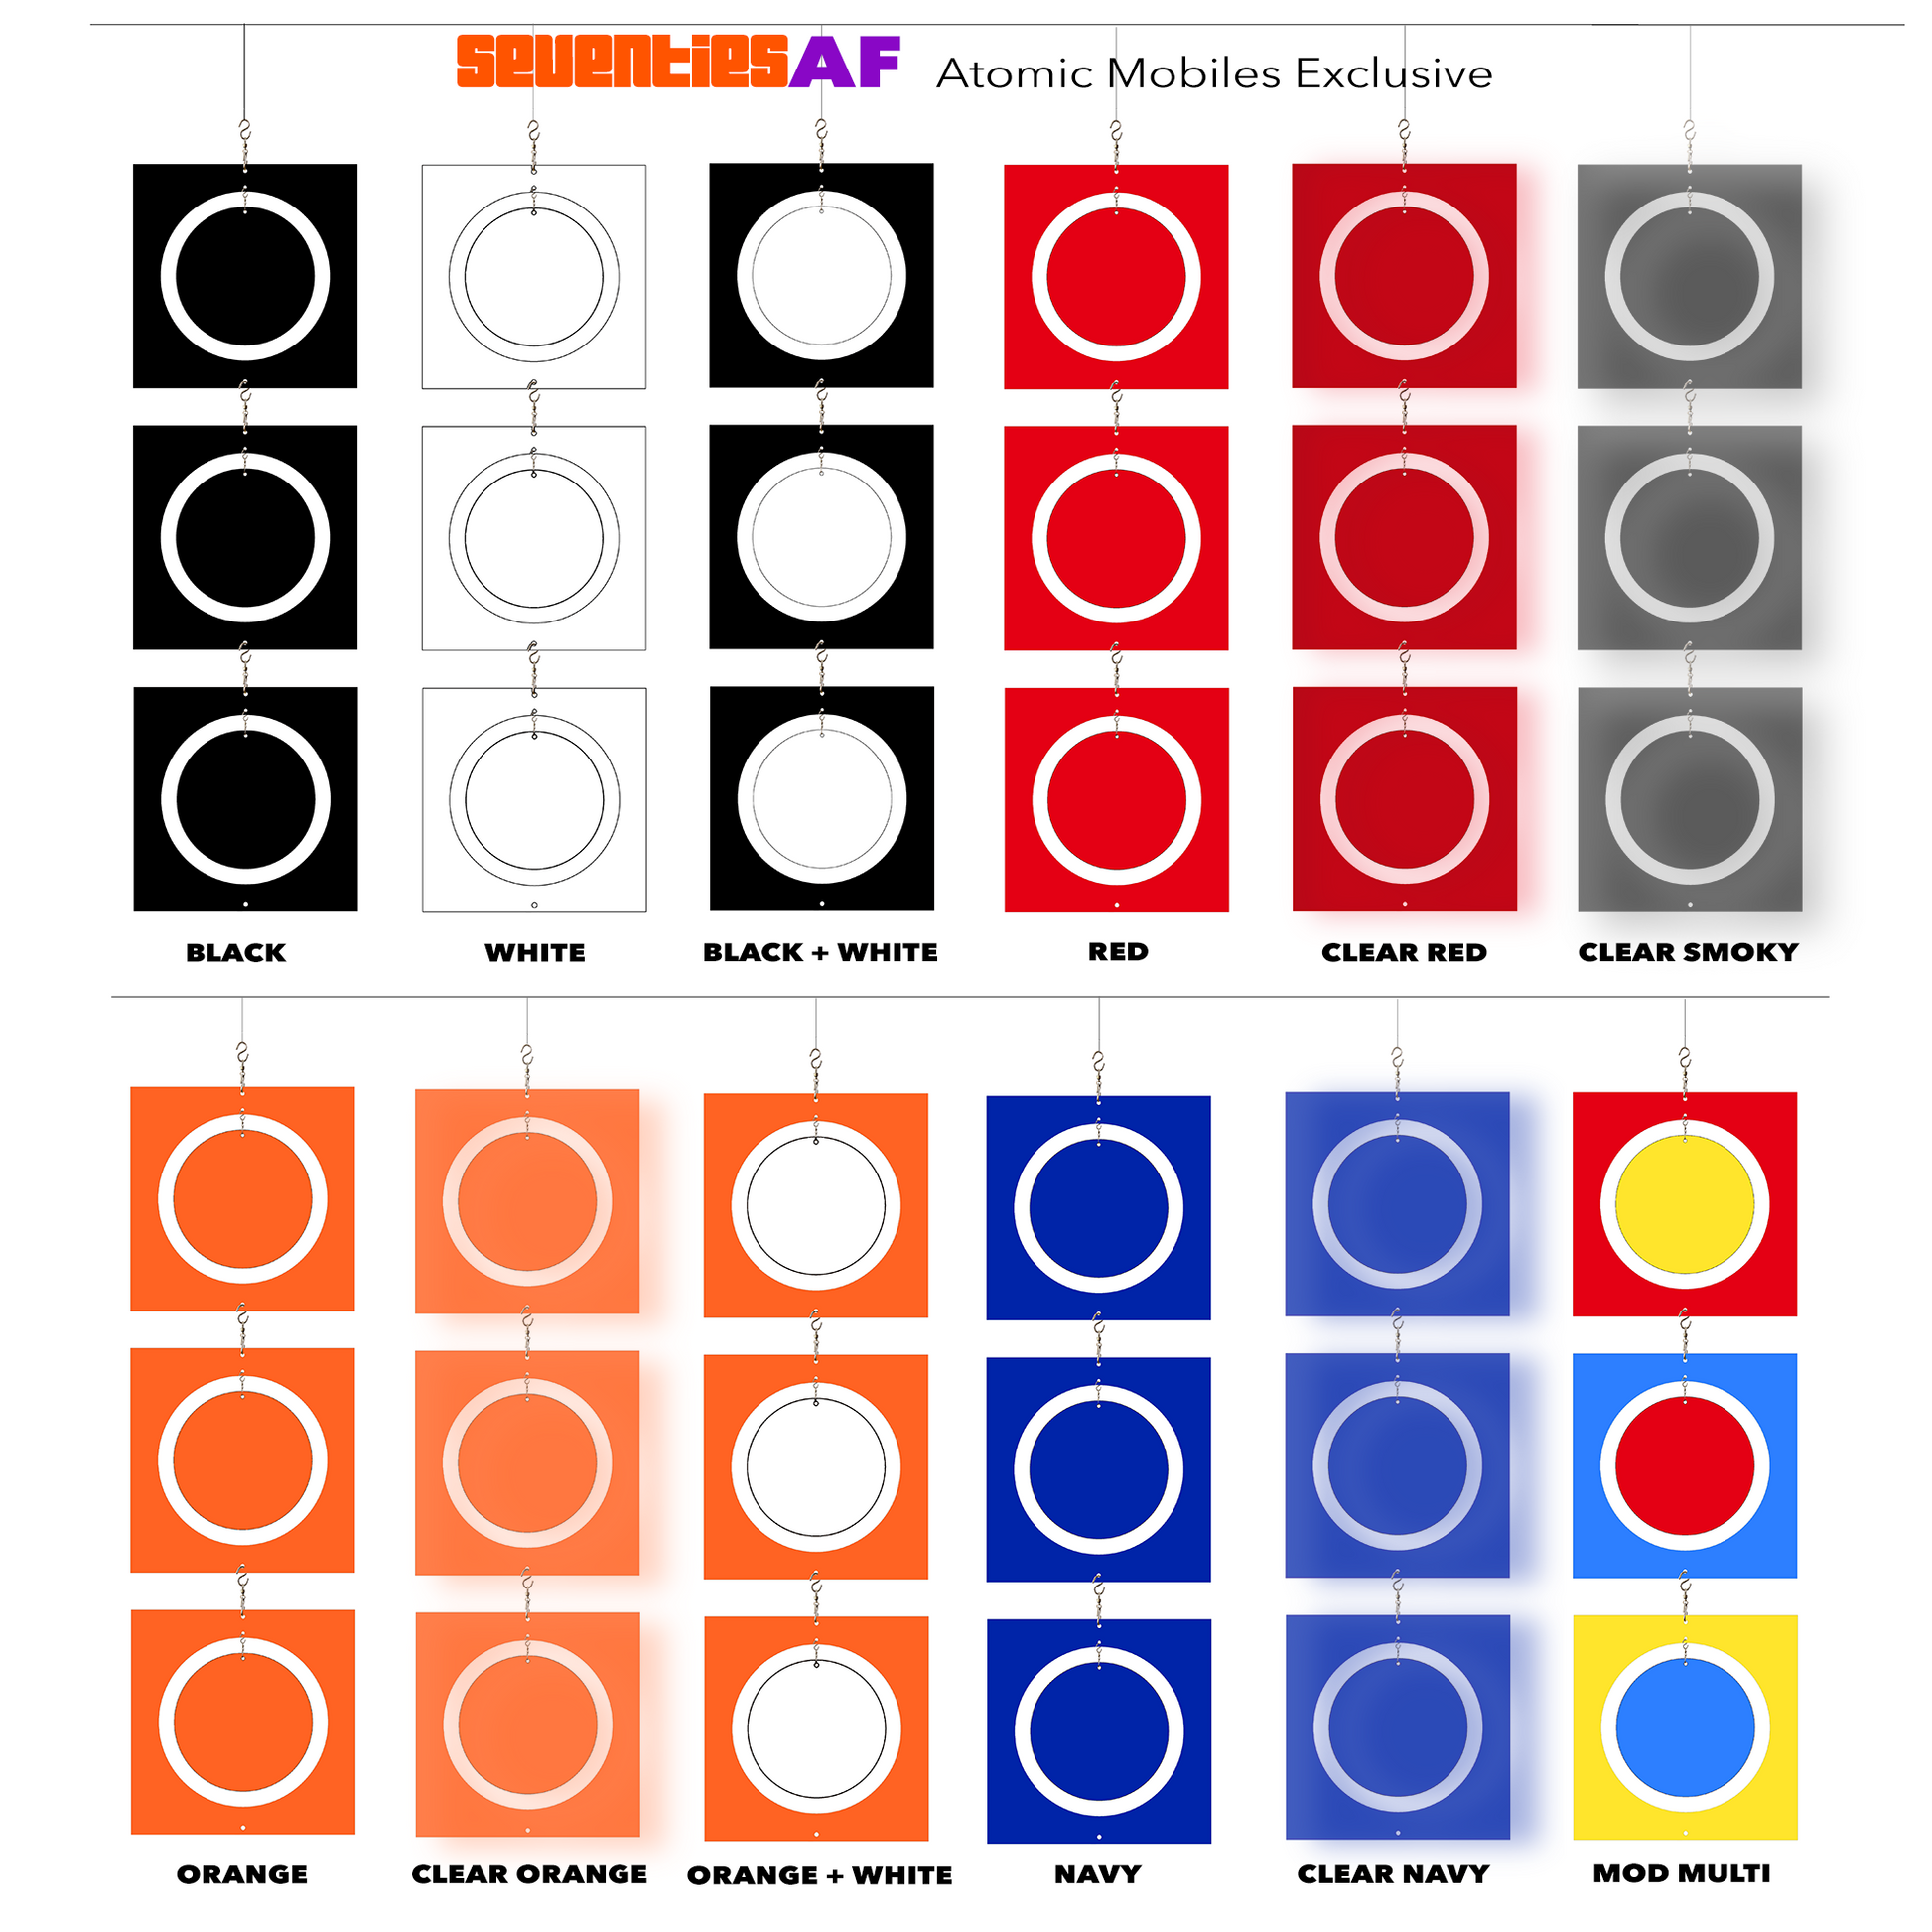 Color Chart for SEVENTIES AF XXL hanging kinetic art mobiles that swivel 360 degrees in Black, Black + White, White, Red, Clear Red, Clear Smoky Gray, Orange, Clear Orange, Orange + White, Navy Blue, Clear Navy, and MOD Multi by AtomicMobiles.com